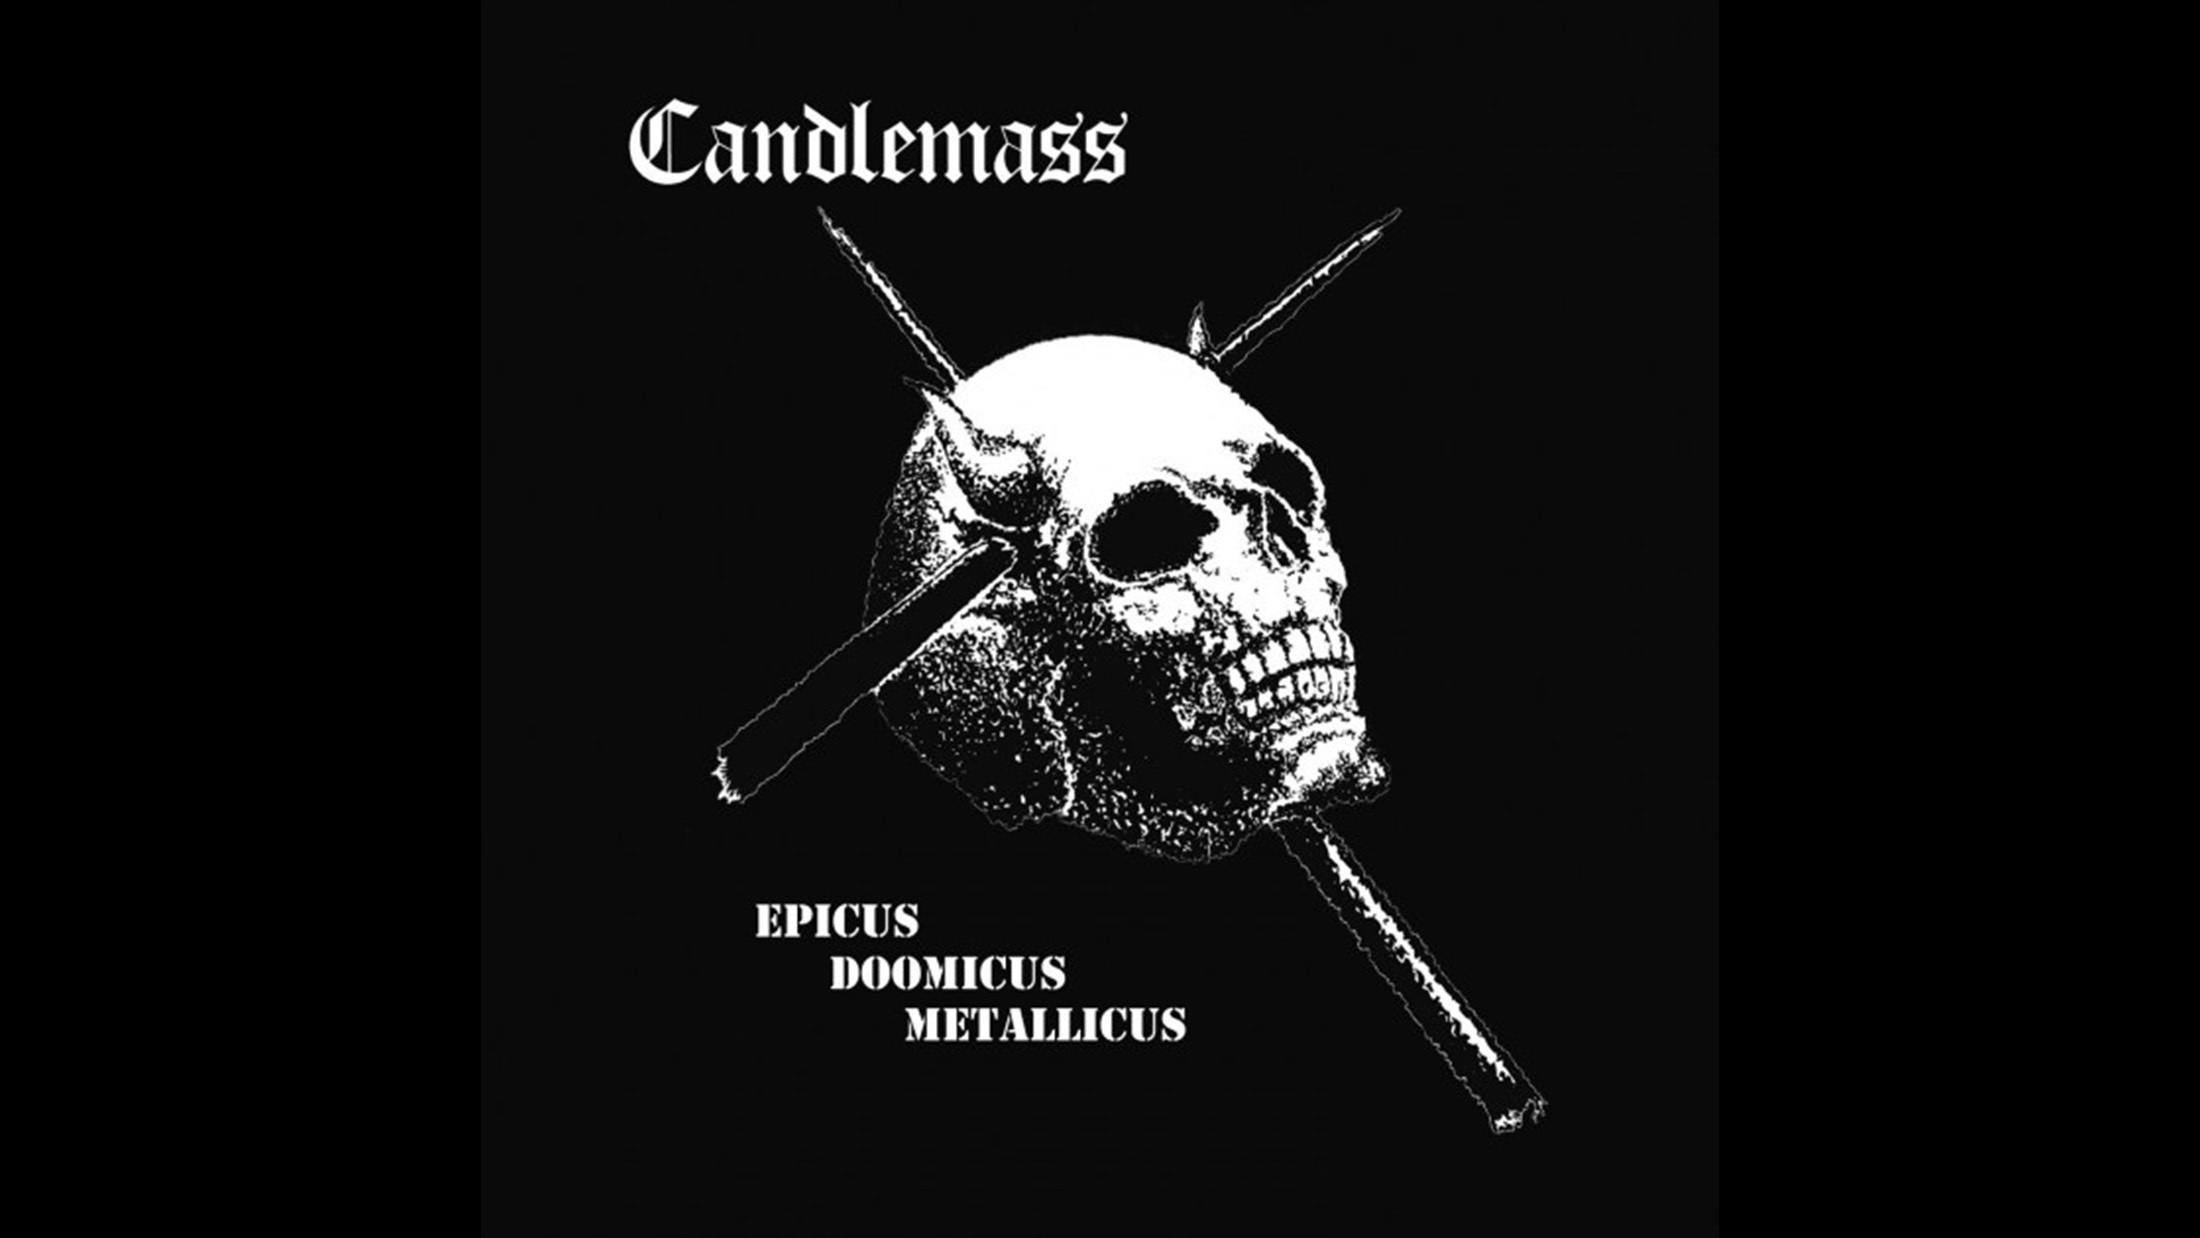 Well, that answers the question of what Swedish doom legends Candlemass’  debut sounds like. But then you press ‘Play’ and hear Johan Längqvist intoning, ‘Please let me die in solitude’ over opener Solitude’s mournful intro, and you realize just how doomy their metal is. The thanks list inside the sleeve was equally chucklesome, declaring, “To hatred, bitterness, pain, depressions and hangovers: without you this album never would have been possible.” Crikey.